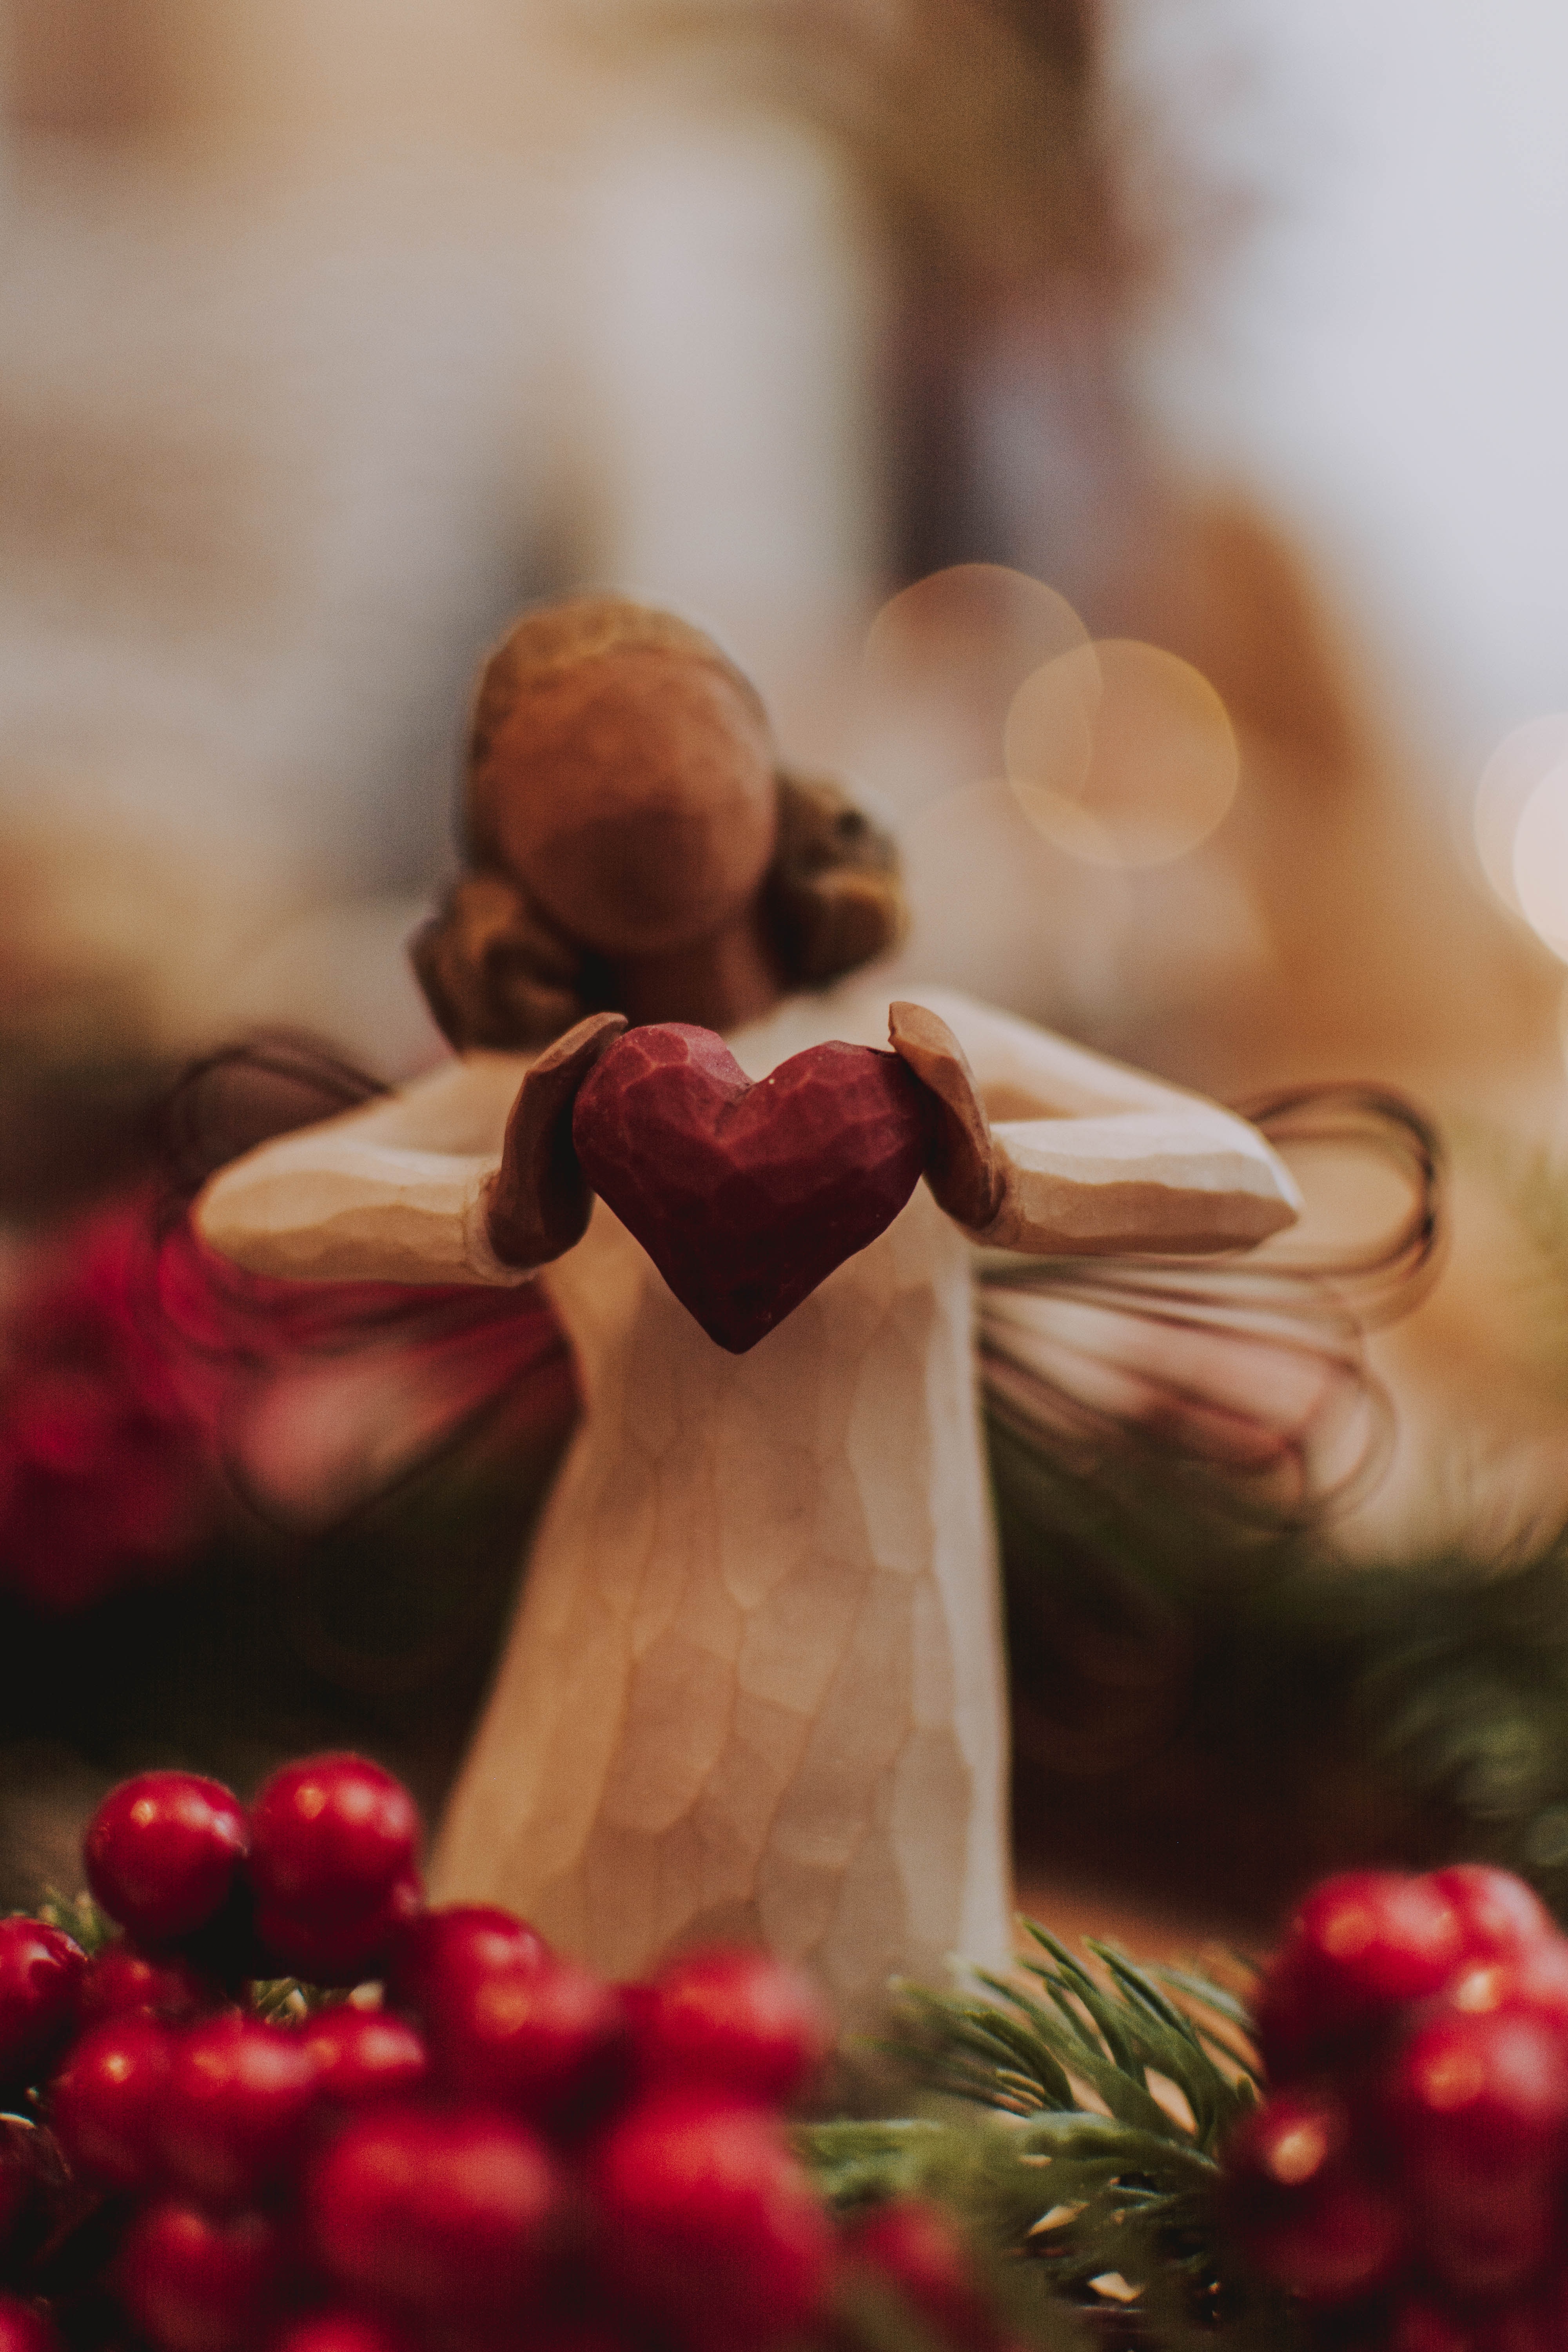 New Lock Screen Wallpapers angel, holidays, new year, christmas, heart, decoration, figurine